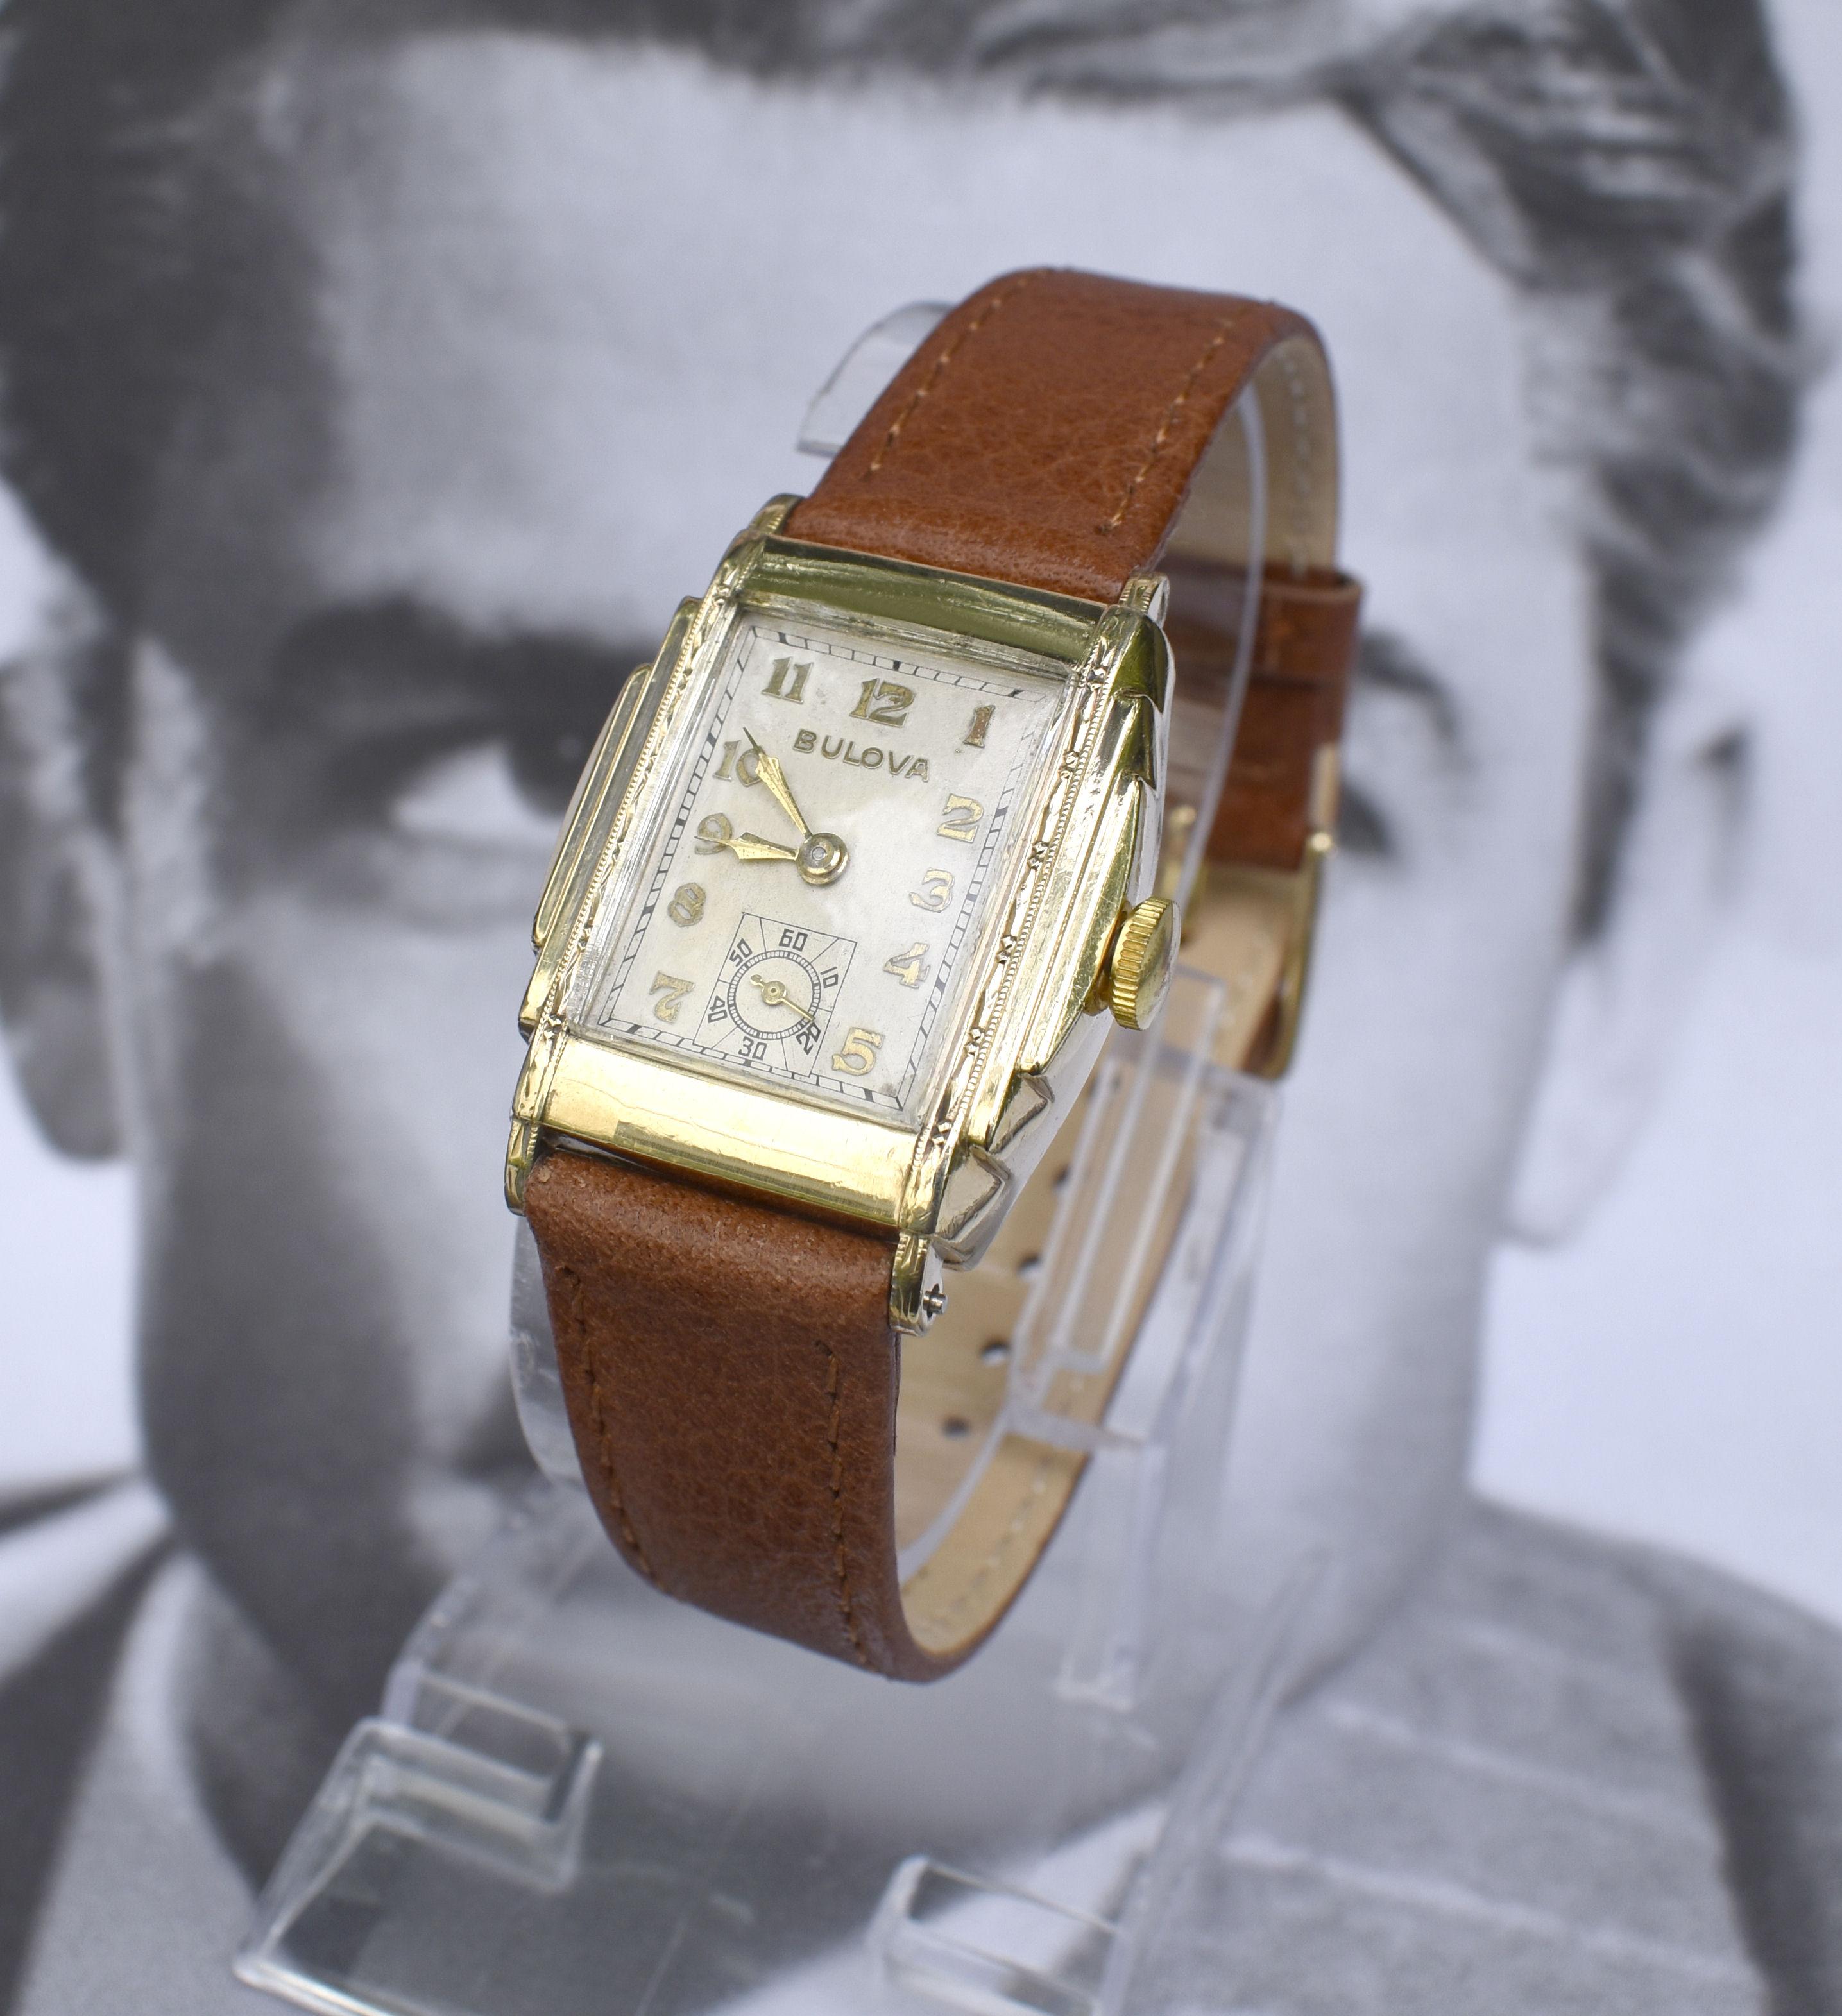 For your consideration is this wonderfully stylish Gents wrist watch dating to 1936. 10k rolled gold top and back with ornate filigree either side of the dial. Just serviced with new mainspring, crystal, winding crown and 16mm leather strap.